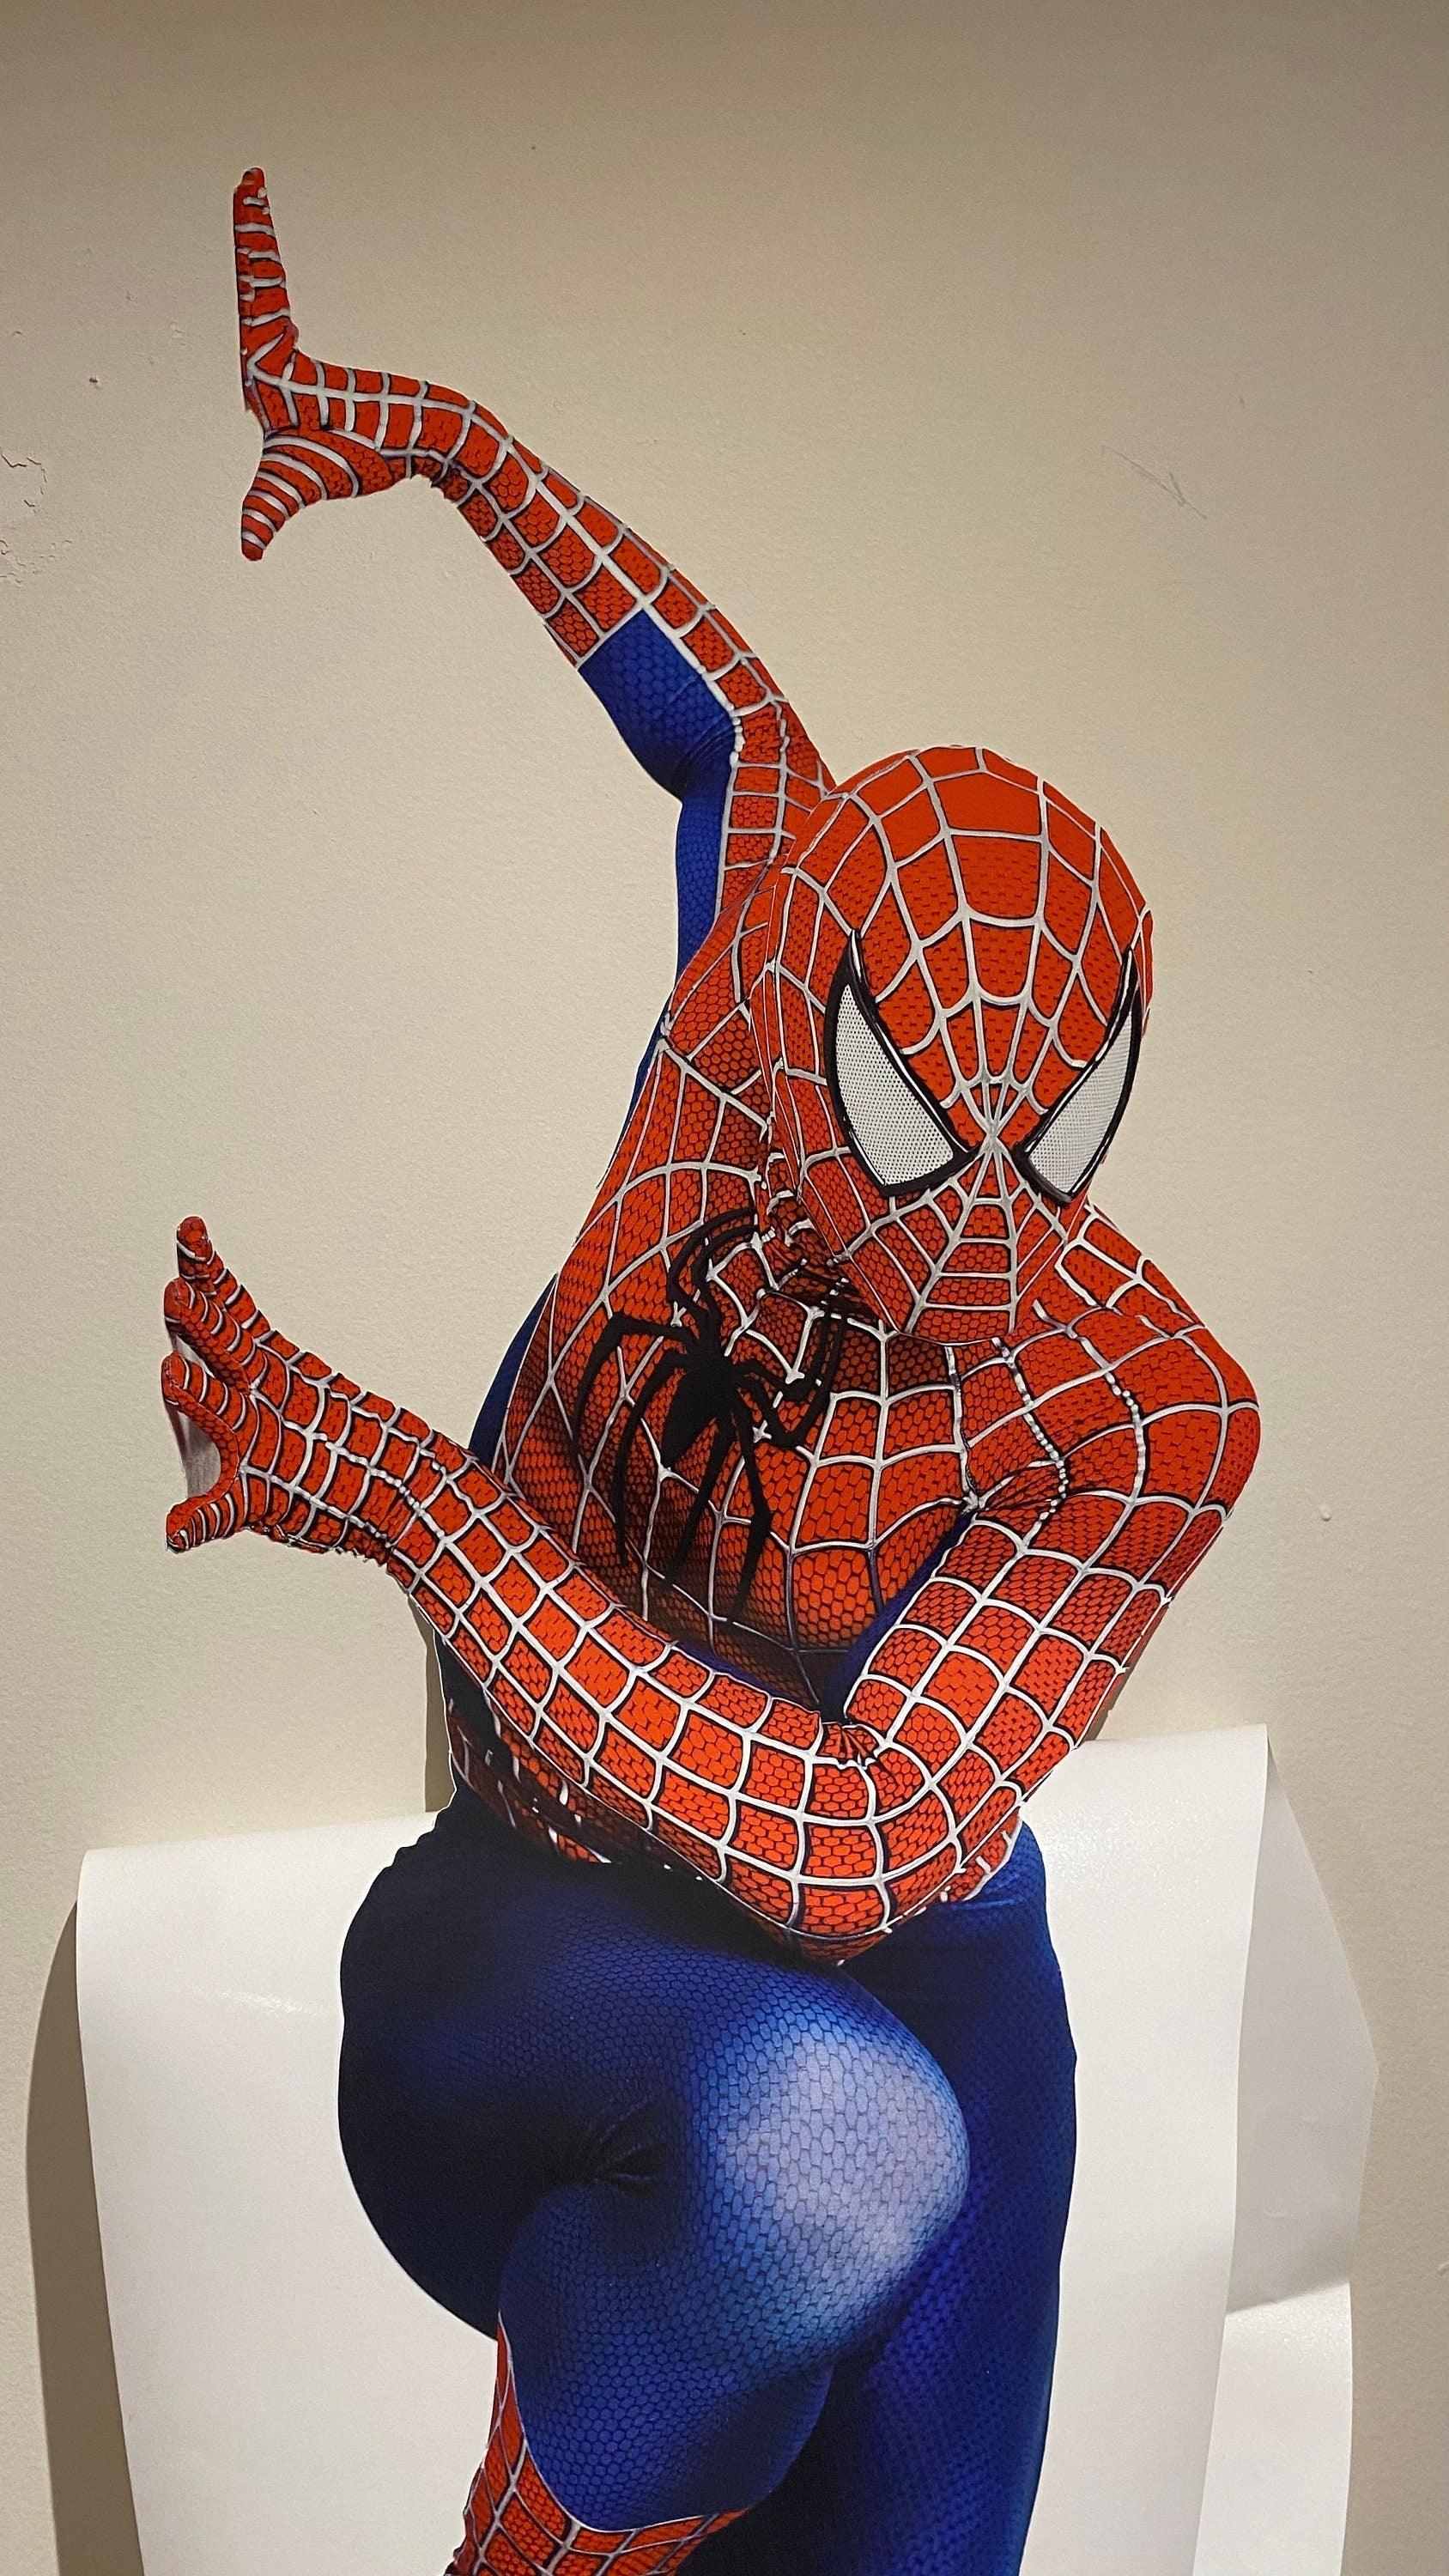 Spiderman Decal Arm Out is great for a kids room No Wall Damage and Removable Anytime